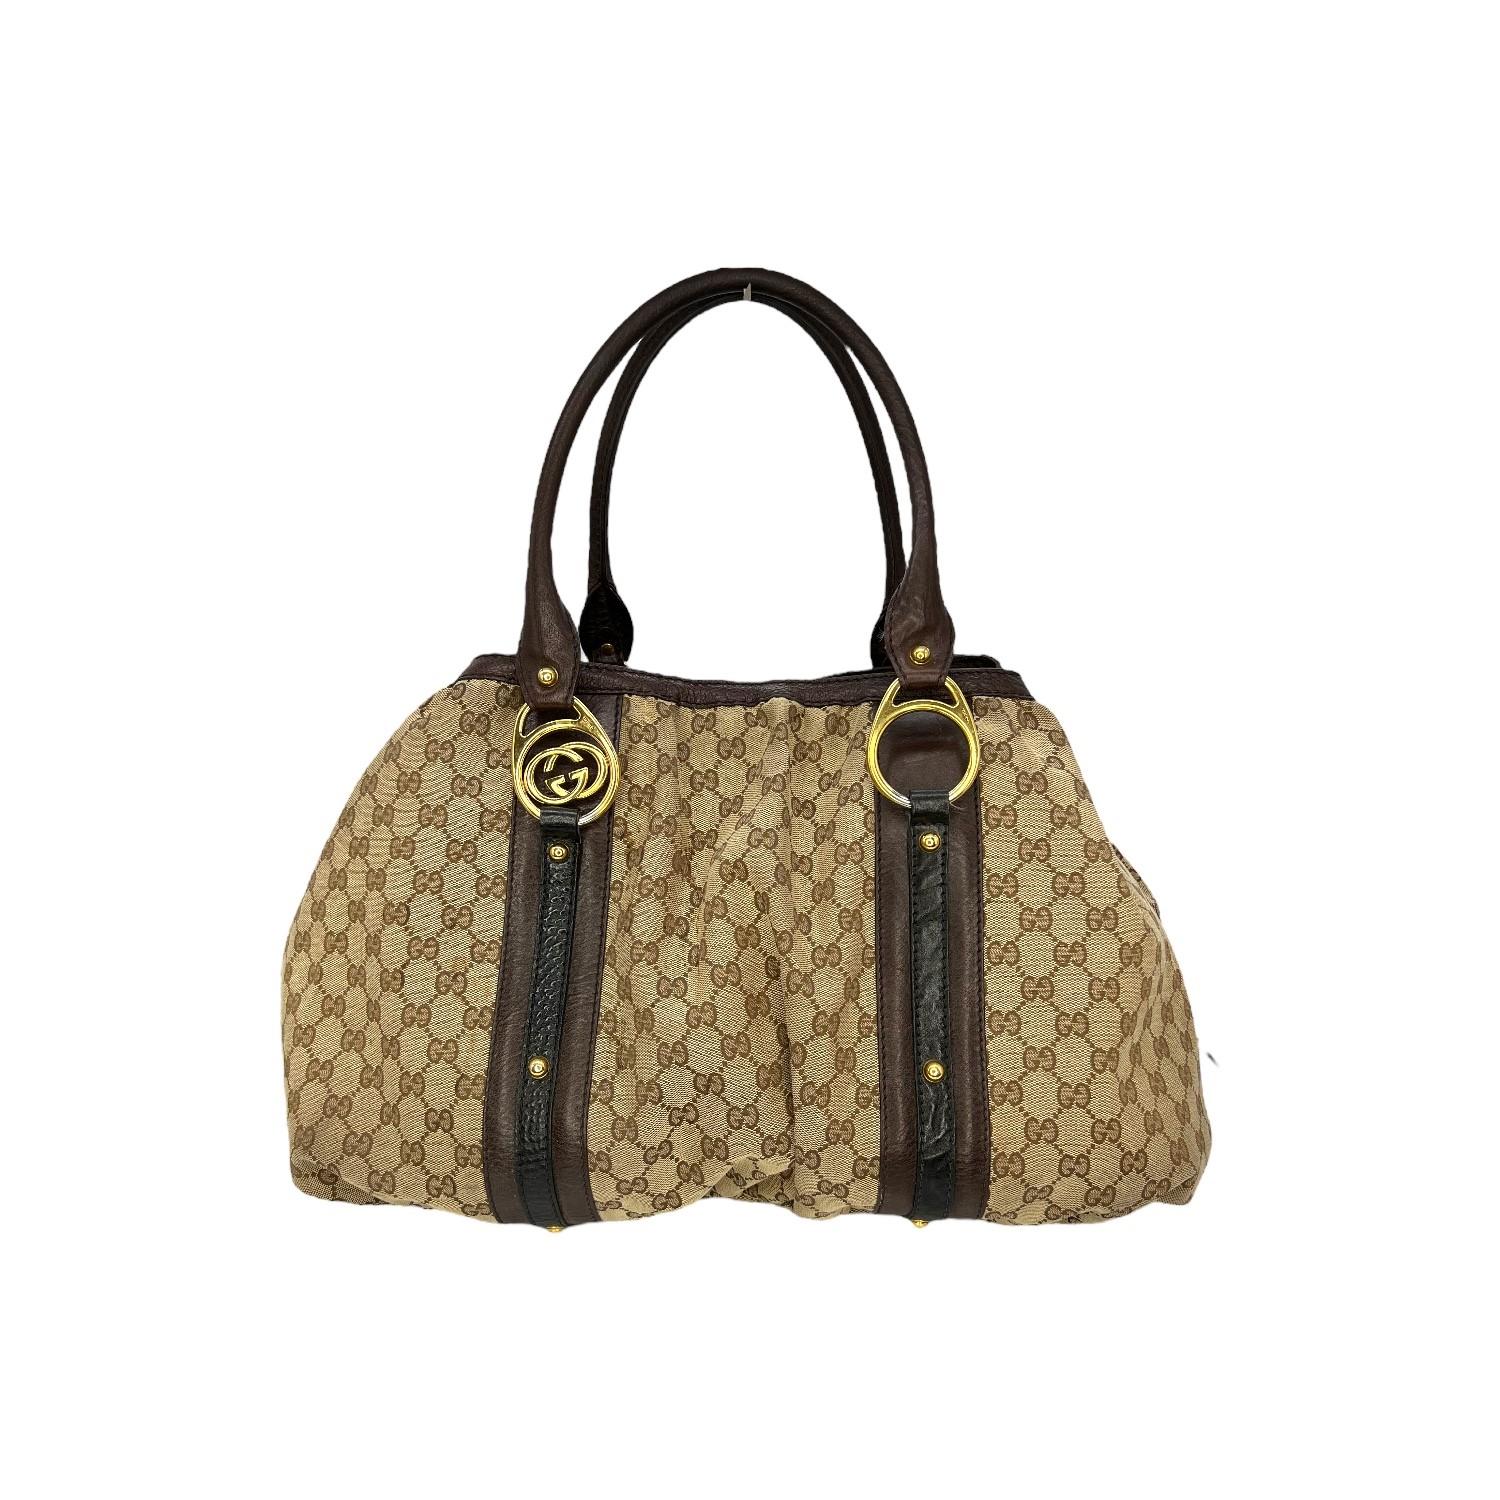 This Gucci GG Canvas Interlocking Icon Tote was made in Italy and it is finely crafted of the Gucci Interlocking GG coated canvas with leather trimming and gold-tone hardware features. It has dual rolled leather handles. It has a magnetic snap